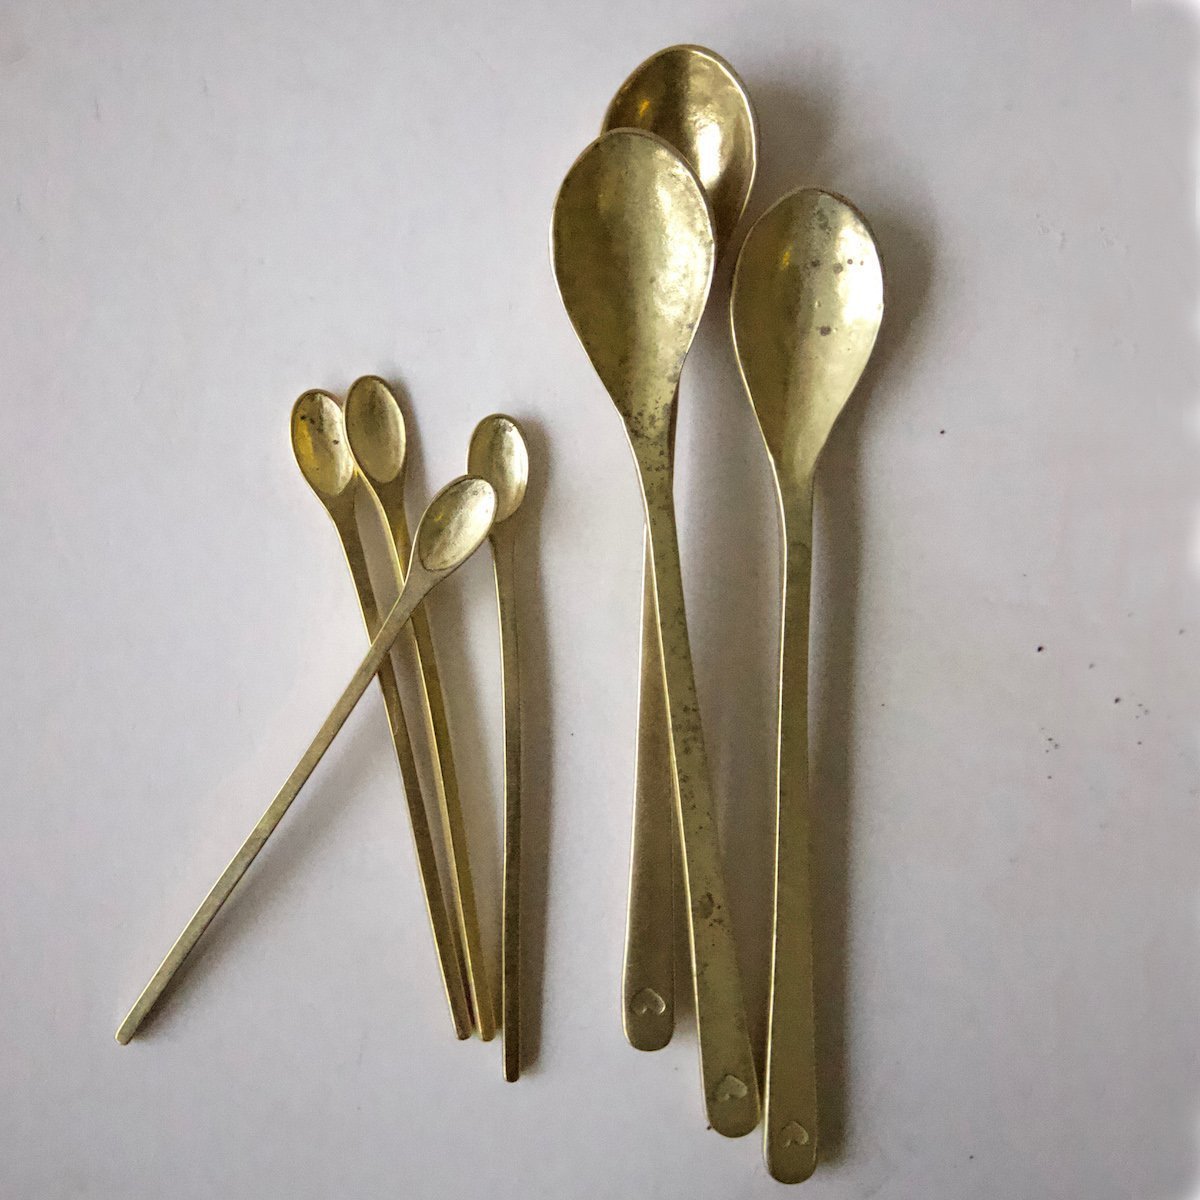 LARGE METAL SPOON by Love Milo Tableware. These brass plated metal spoons have a natural organic shape and are a lovely addition to any of the Love Milo ceramics range. Available at Sarza home décor & furniture store in Rye, New York. We specialize in contemporary African design.